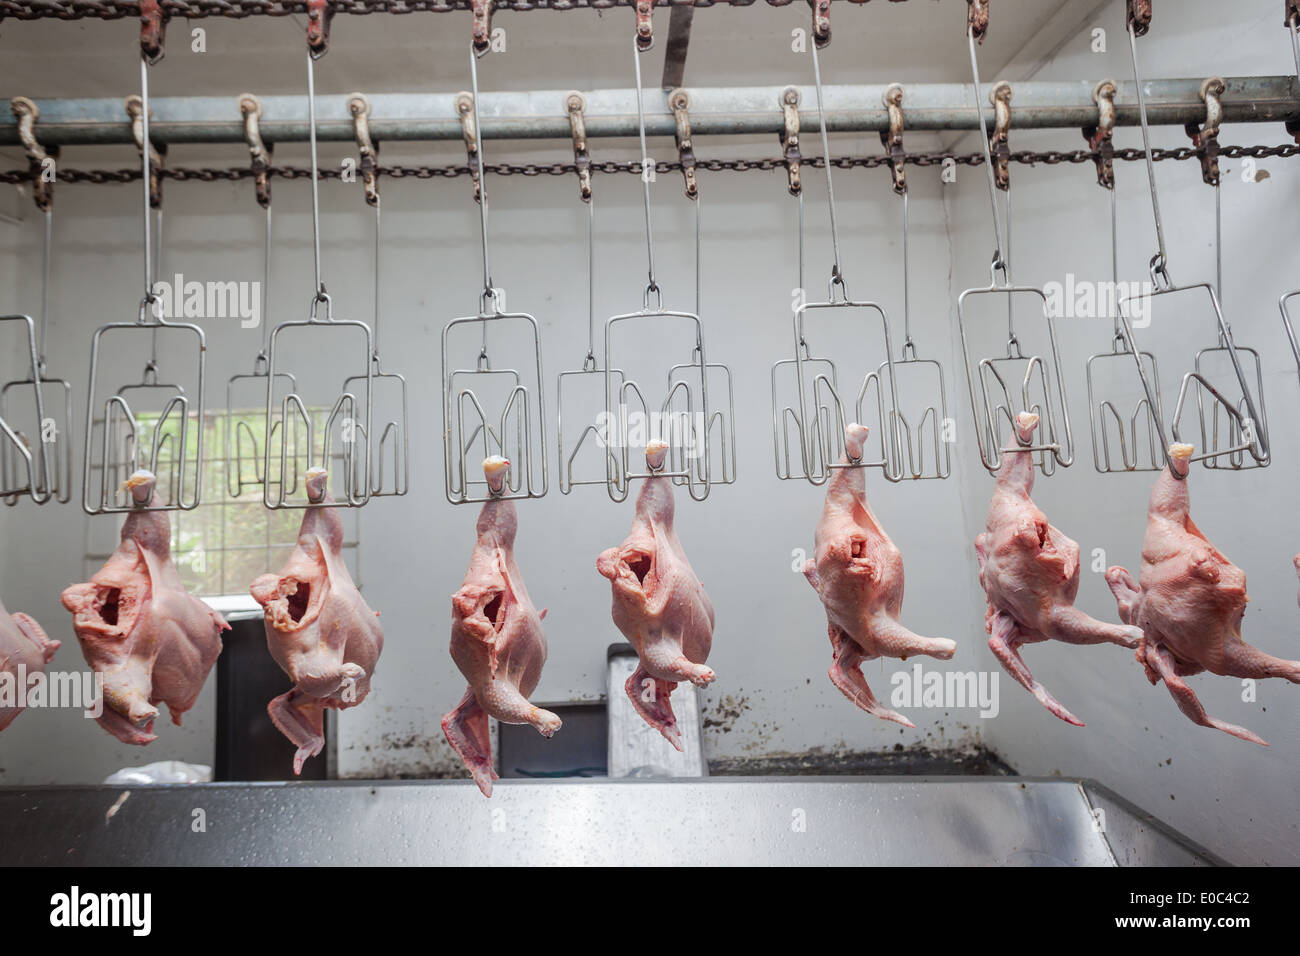 262 Poultry Slaughterhouse Stock Photos - Free & Royalty-Free Stock Photos  from Dreamstime